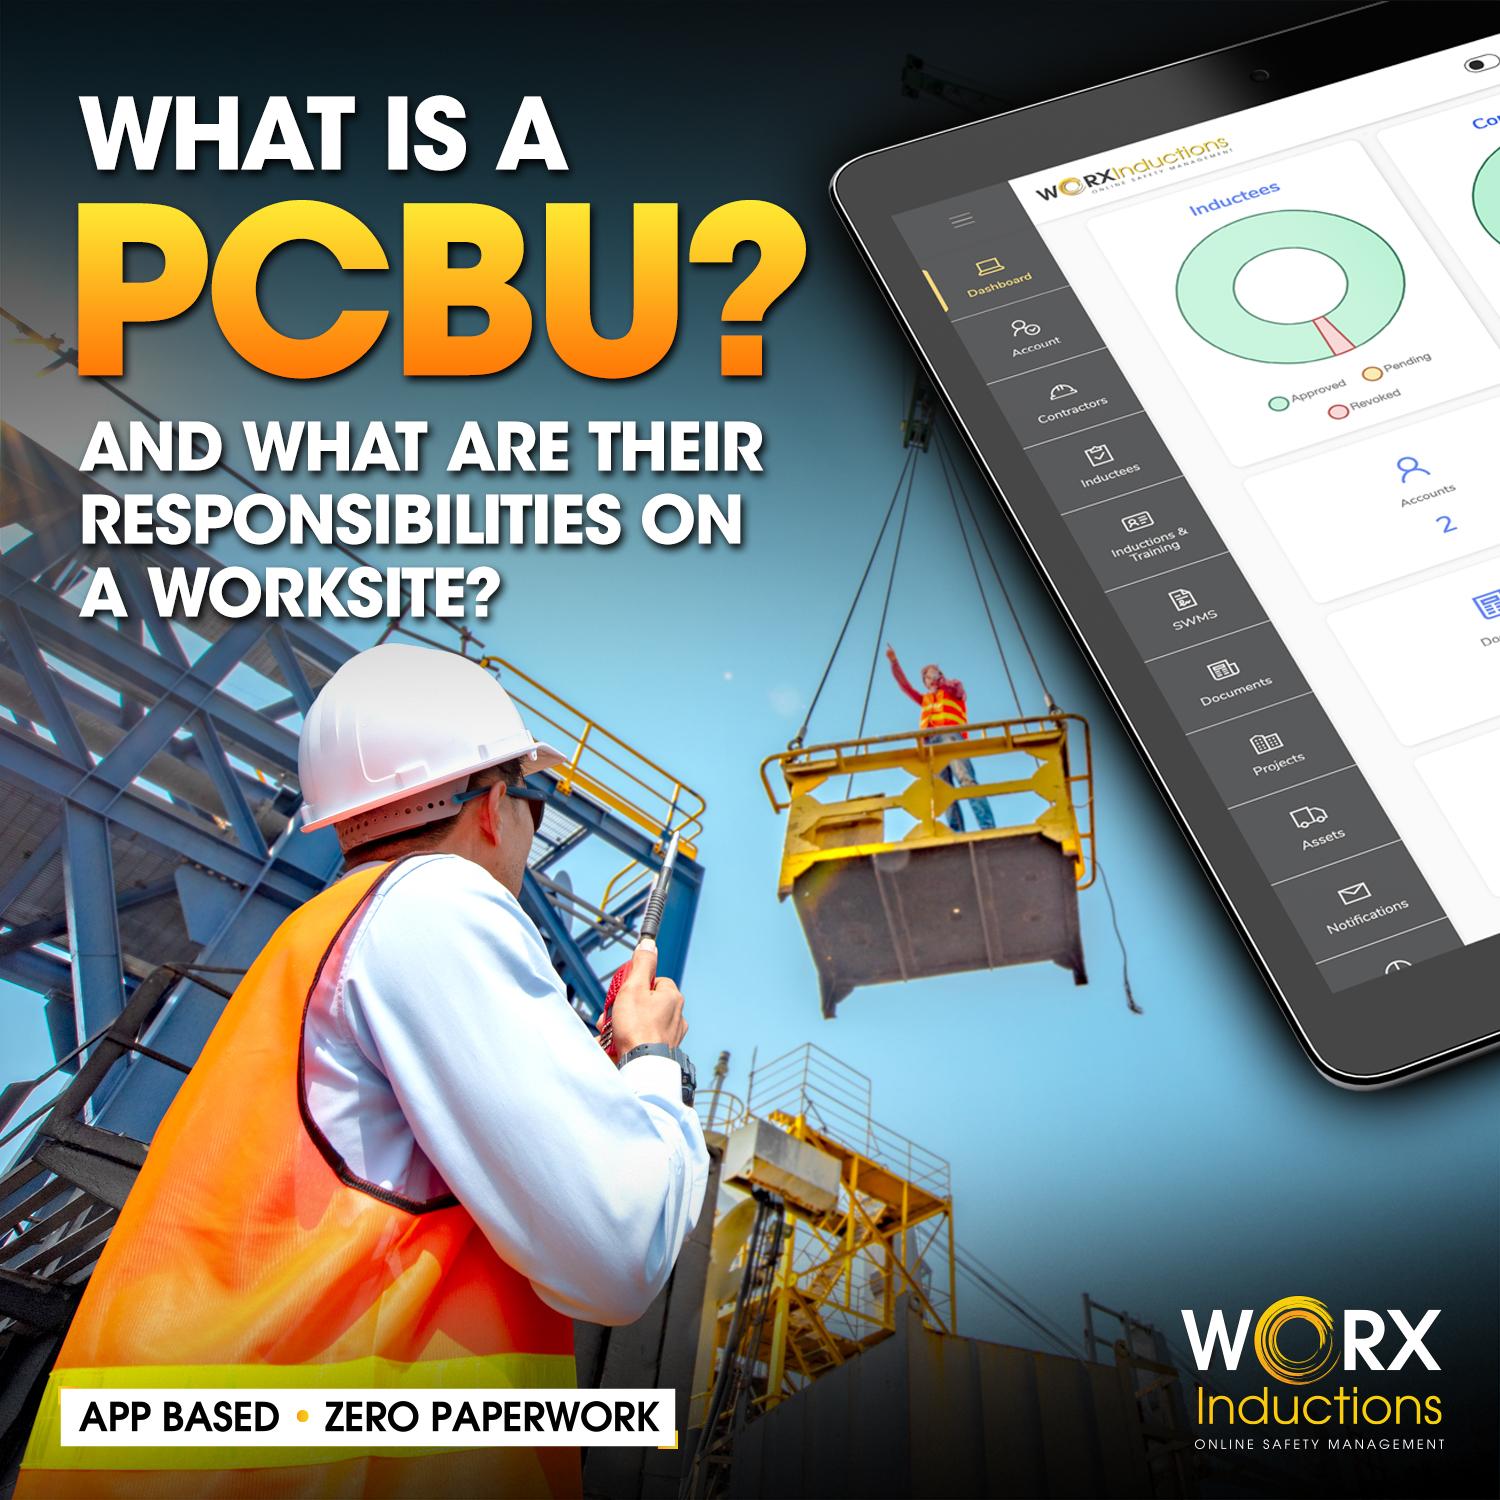 What is a PCBU and what are their responsibilities in a worksite?